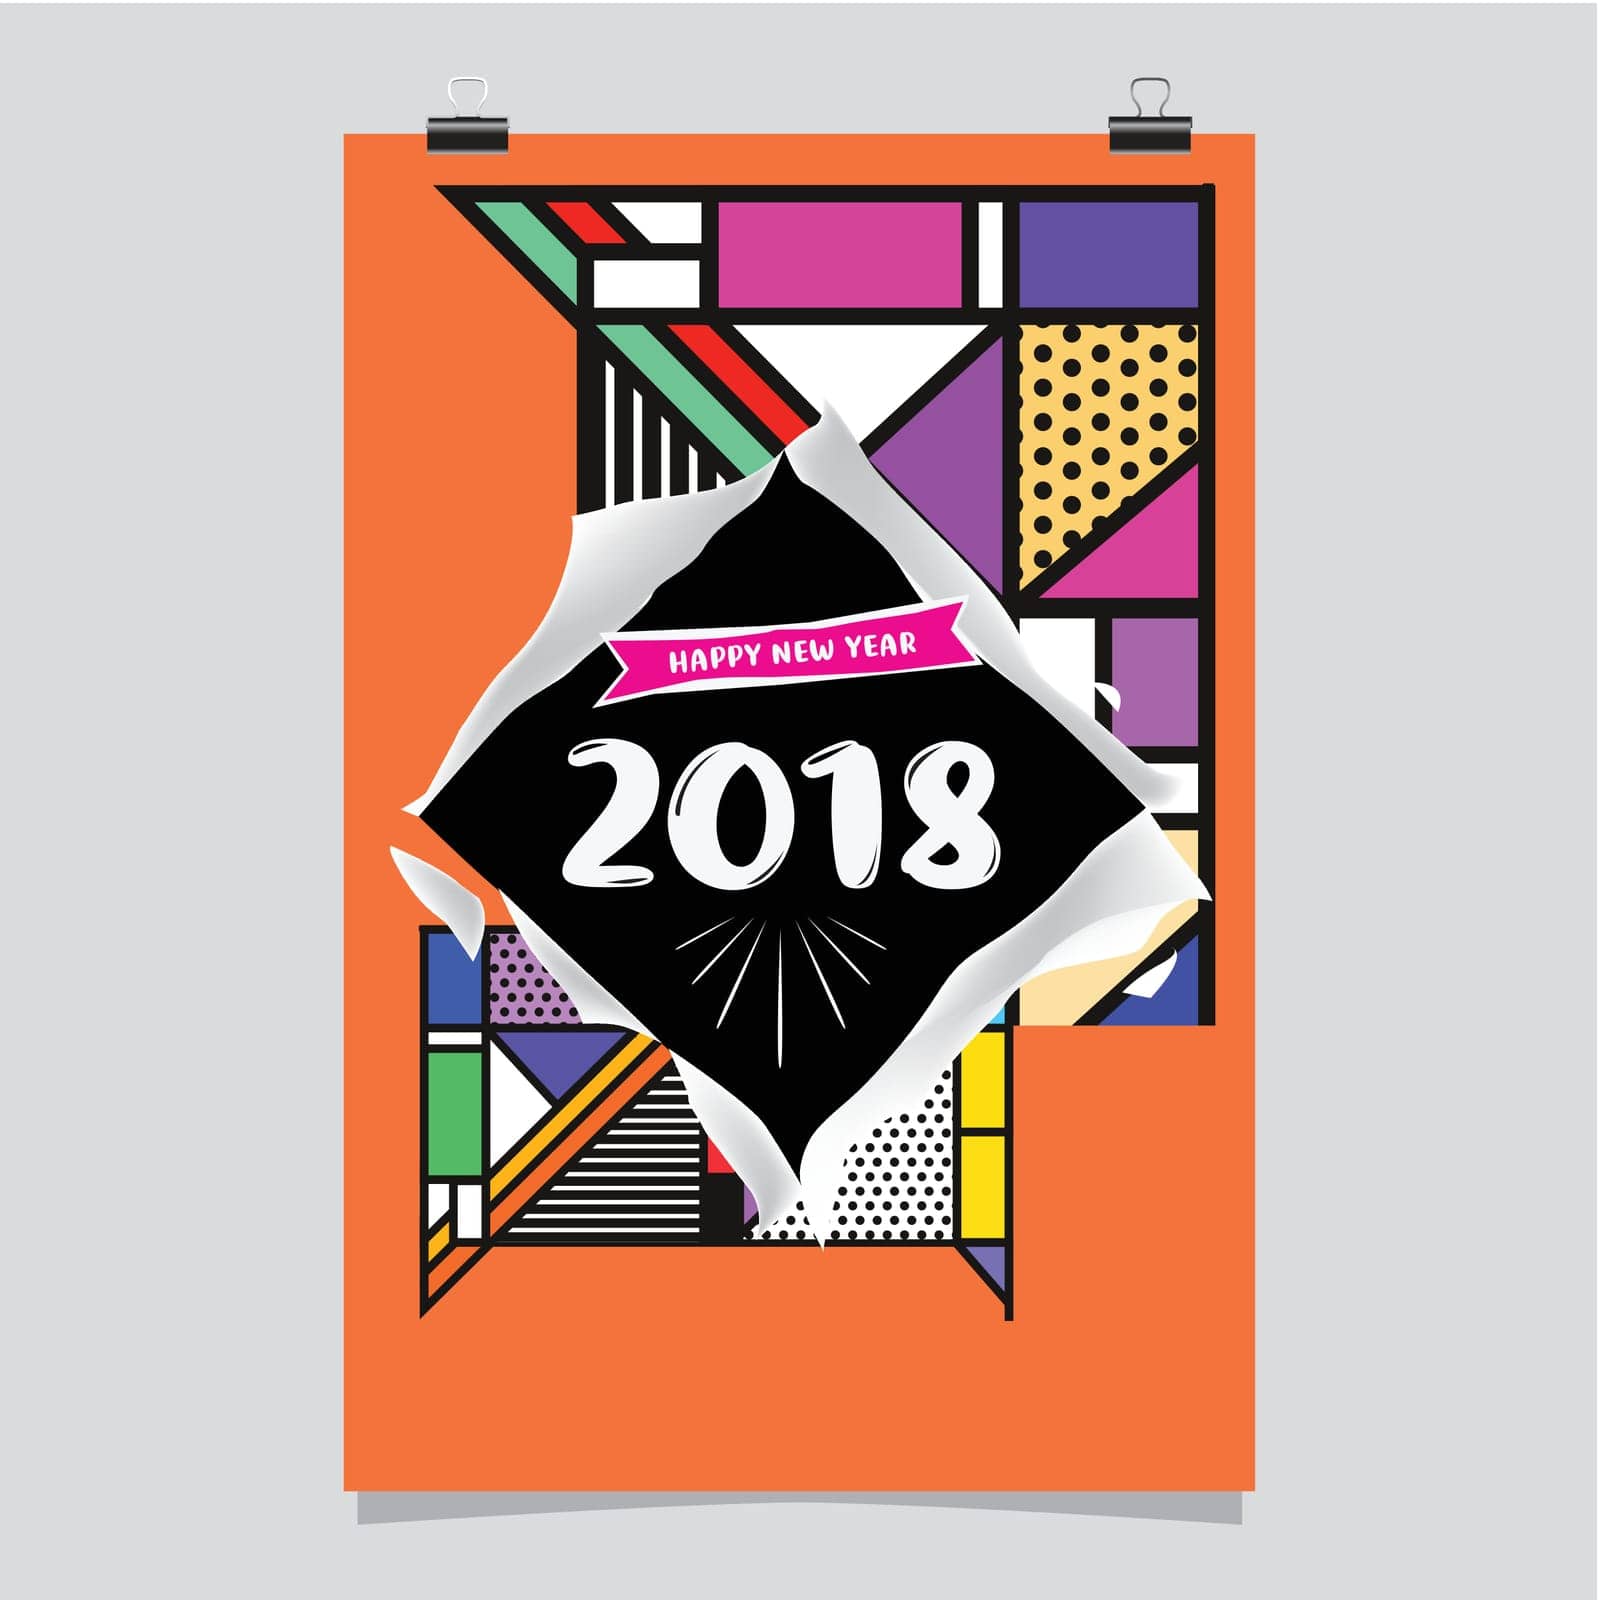 date,symbol,typography,year,happy,greeting,type,cover,annual,day,element,new,celebrate,invitation,cheerful,decorative,christmas,square,celebration,background,geometric,style,poster,party,card,colorful,template,winter,holiday,ornament,happiness,eve,design,vector,event,xmas,calendar,memphis,set,display,festive,retro,banner,2021,abstract,layout,multicolored,2018,illustration